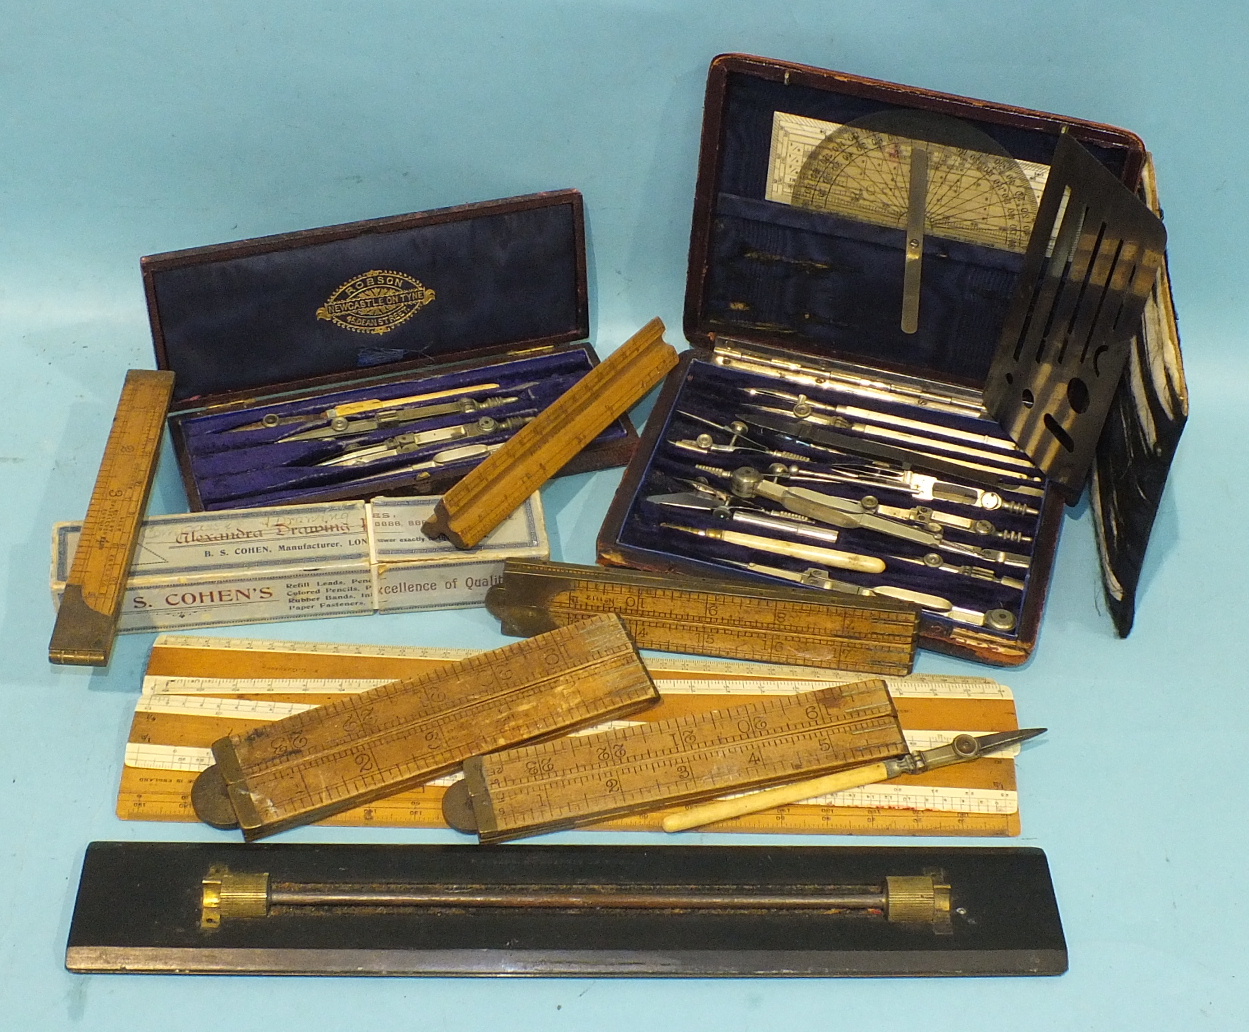 Two part-sets of drawing instruments in leather cases and loose, a 16cm boxwood triangular shape